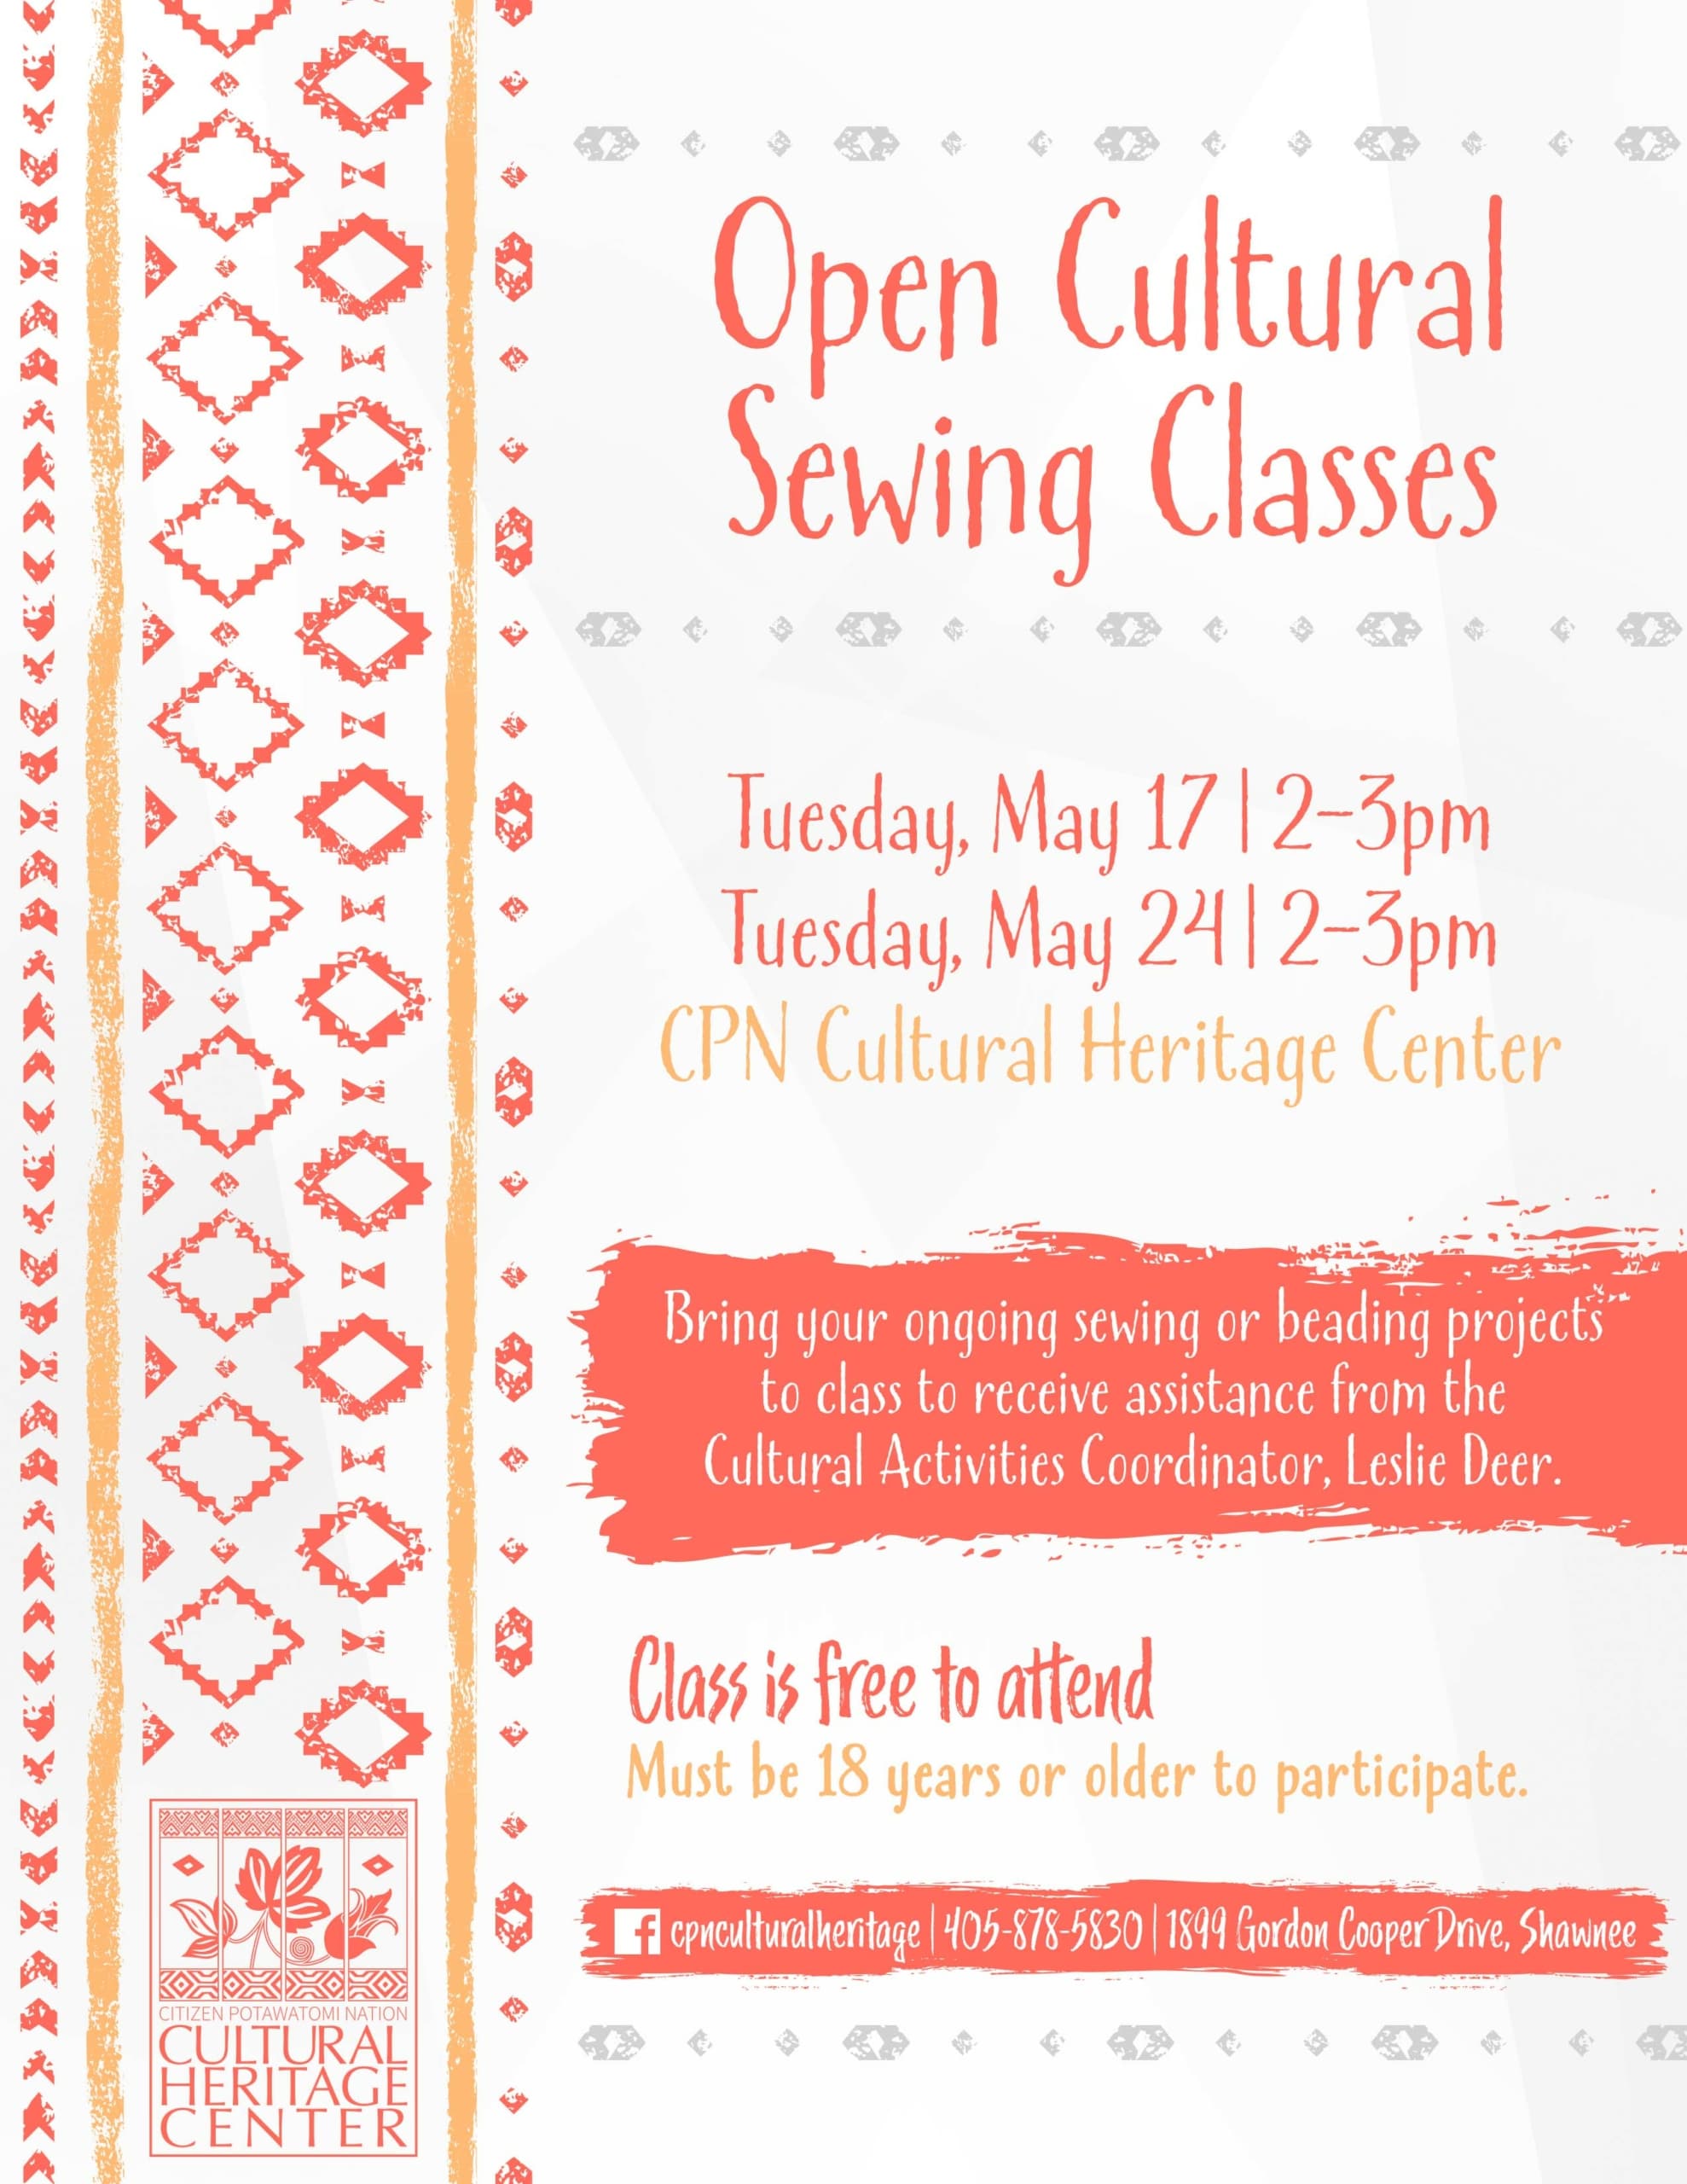 Orange and peach geometric patterns surround text that invites participants to open sewing or beading workshops on May 17 and 24, 2022.